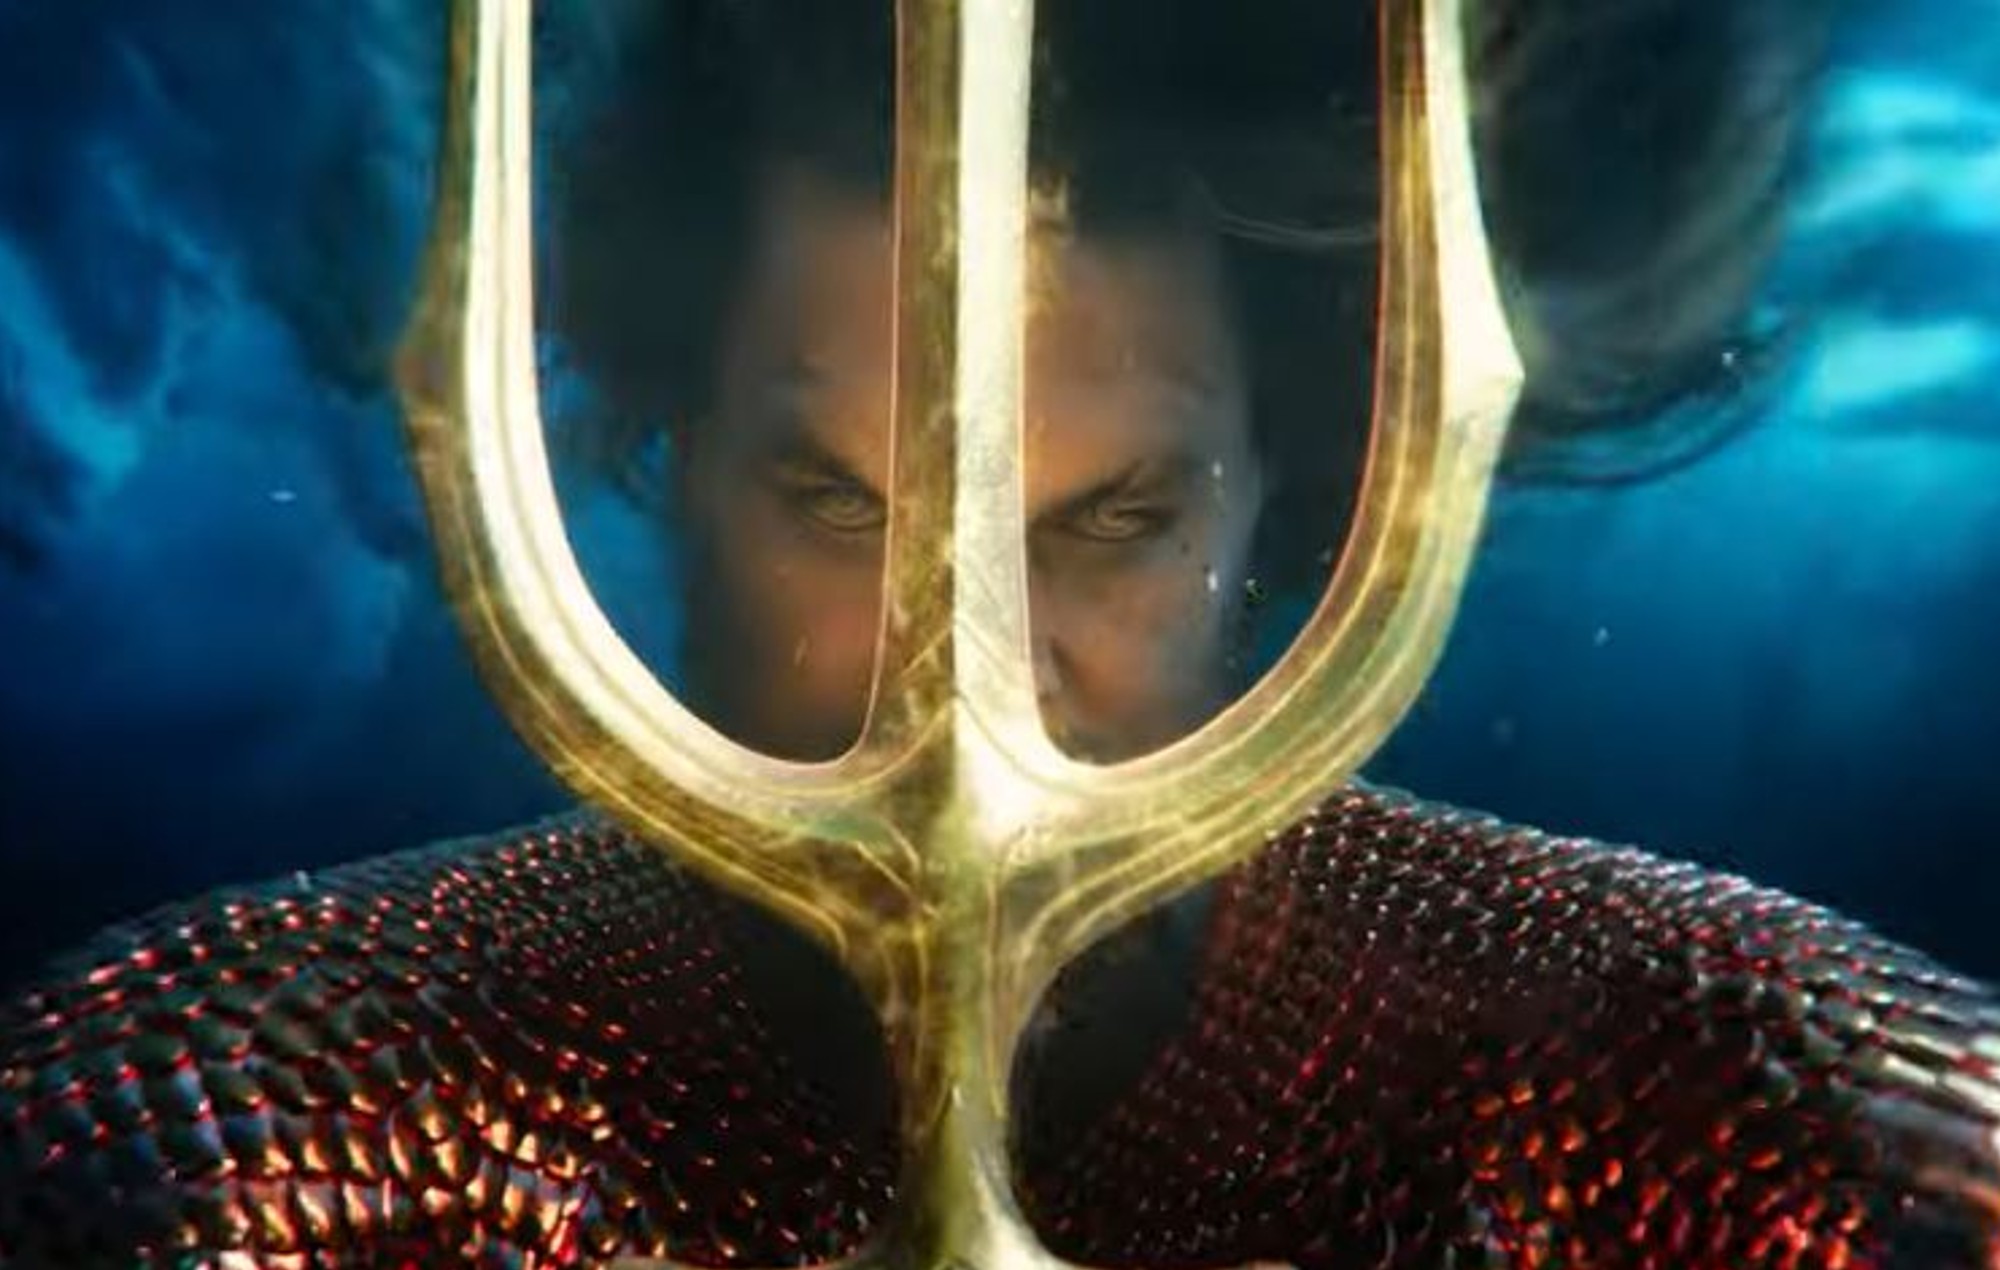 Jason Momoa on his future as Aquaman: “It’s not looking too good”